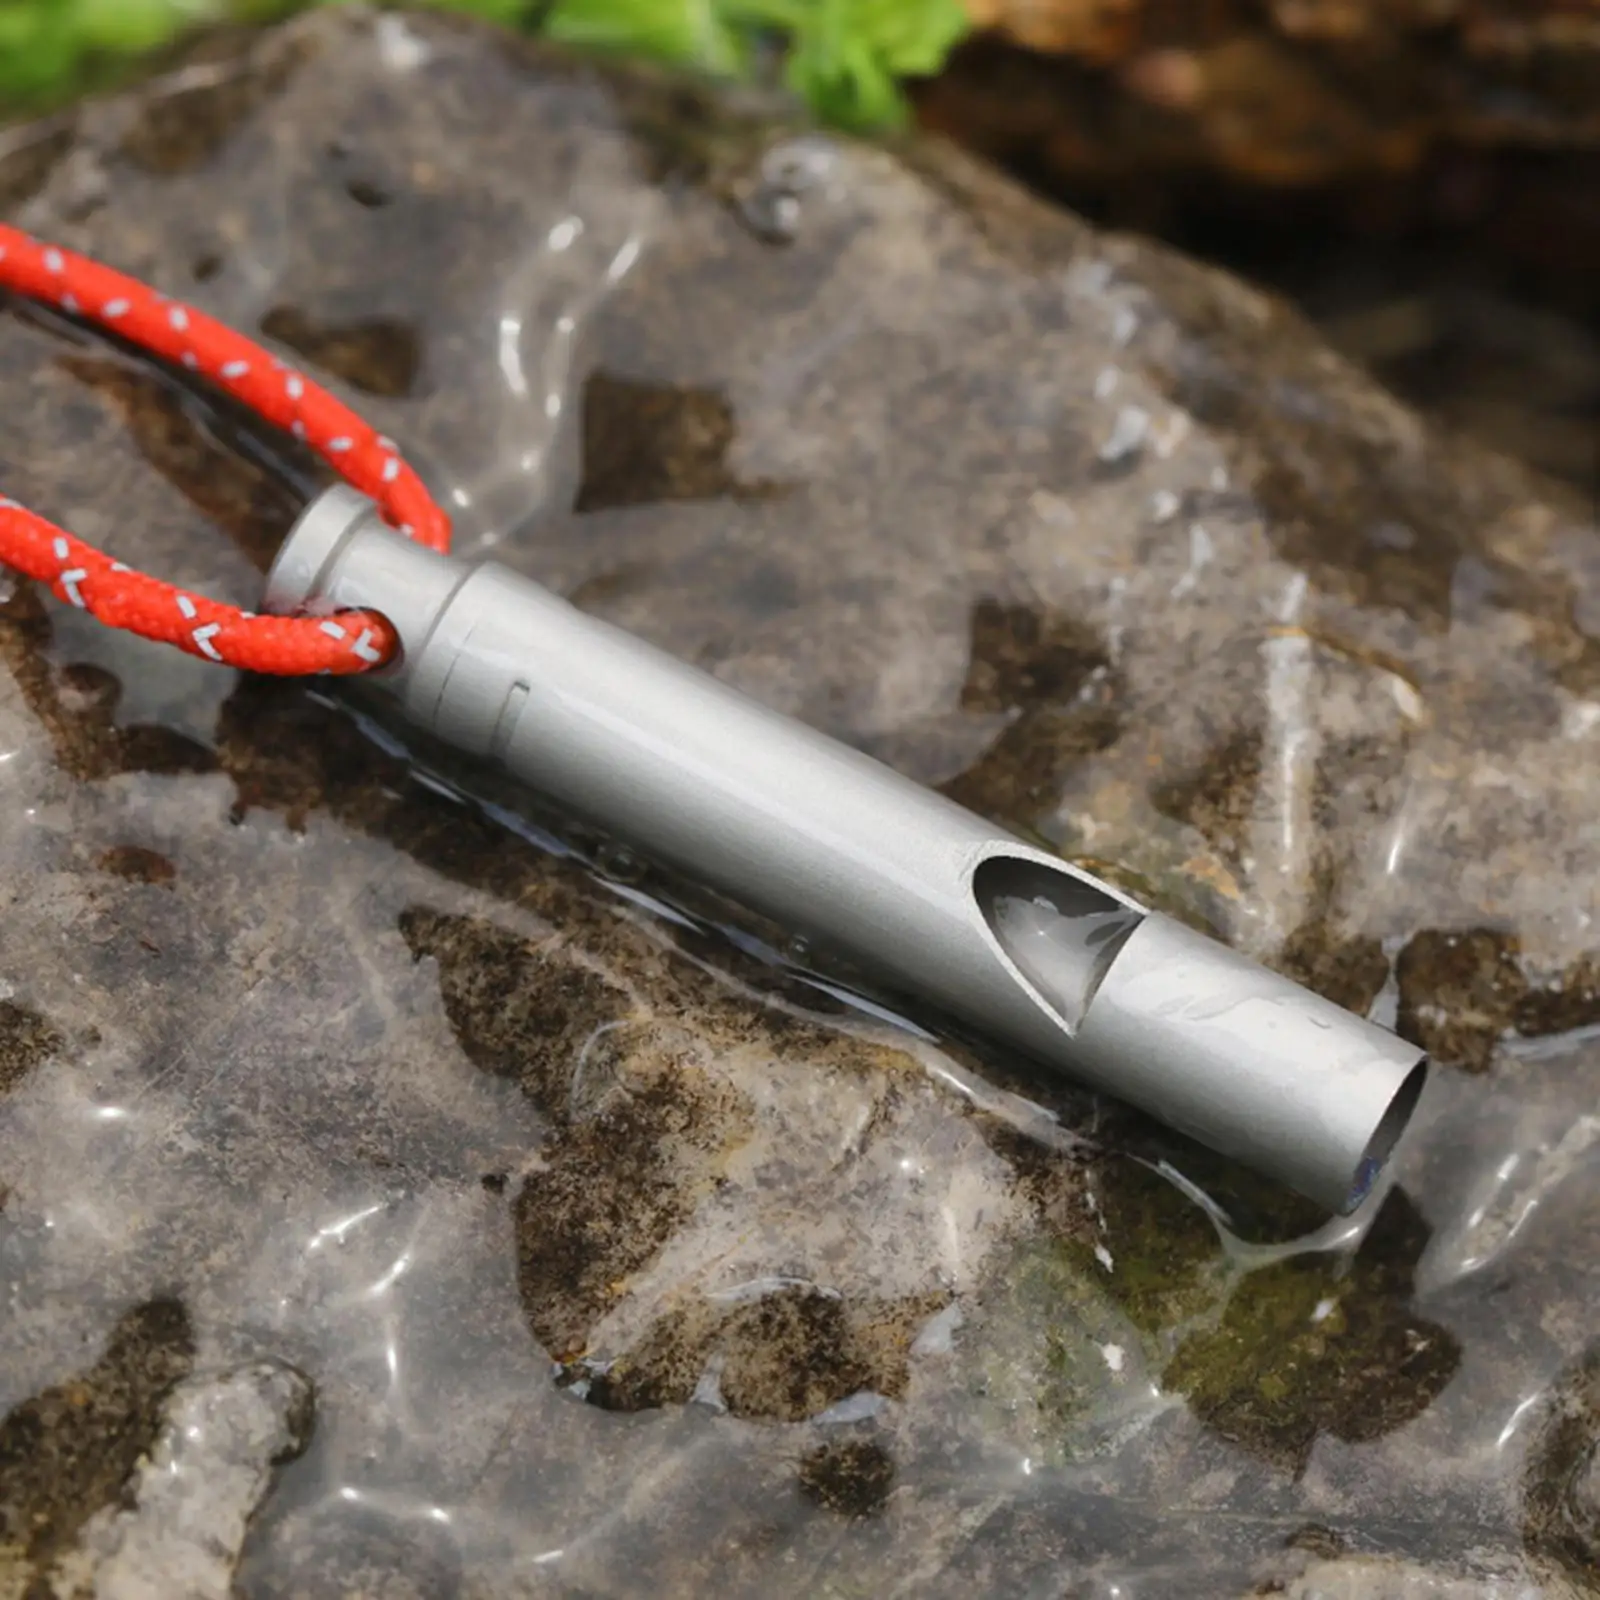 Outdoor Camping Equipment Survival Emergency Whistle multi-tool Titanium Mmilitary Emergency Hiking Exploring